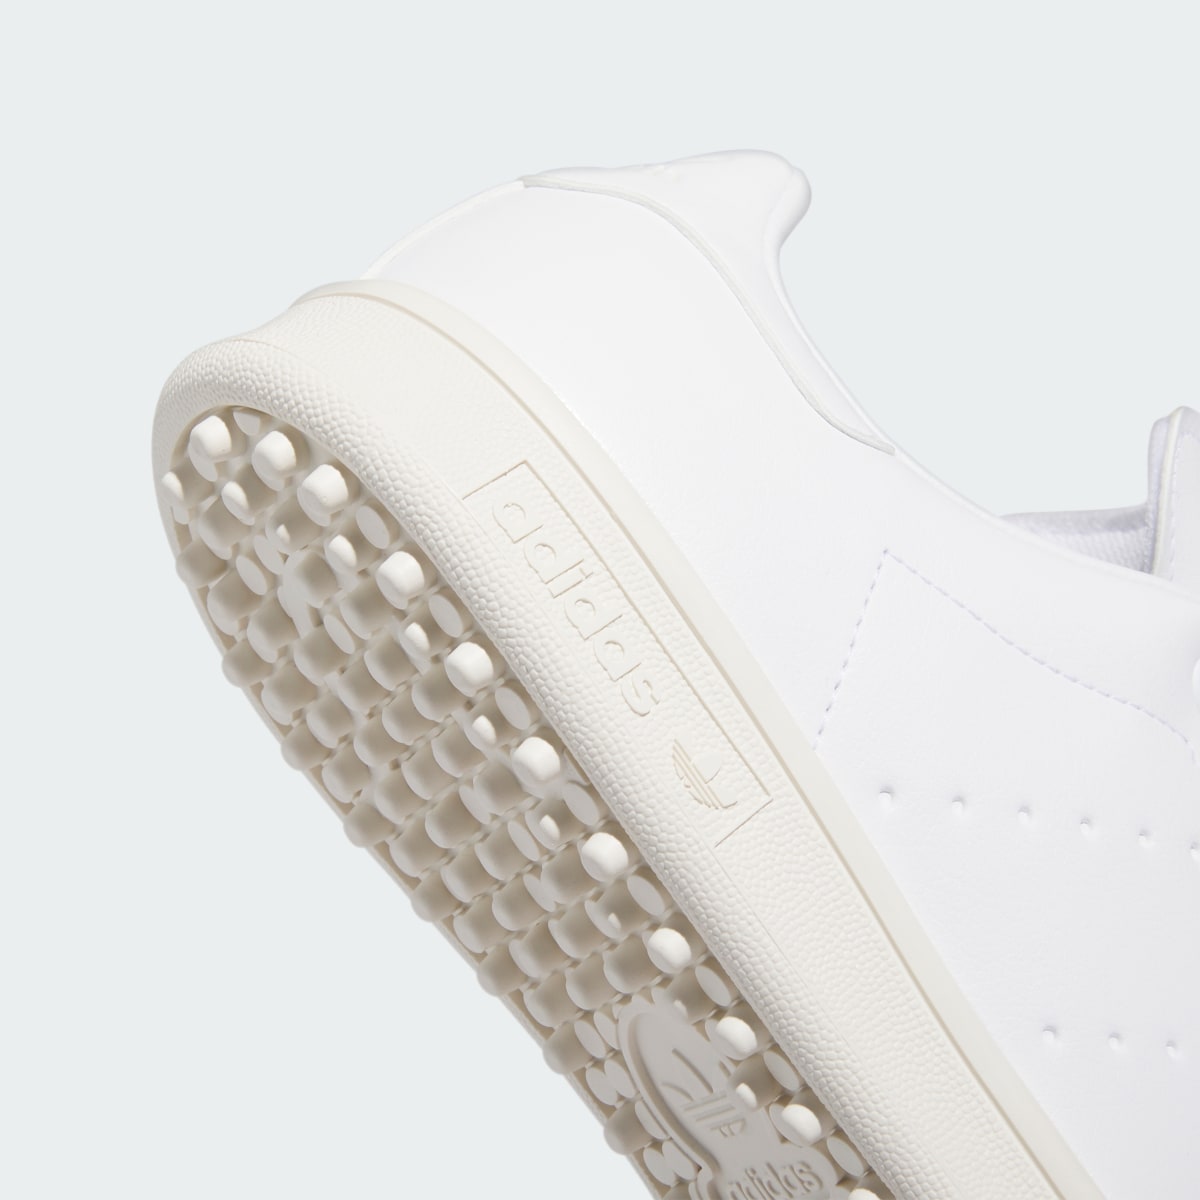 Adidas Stan Smith Golf Shoes. 10